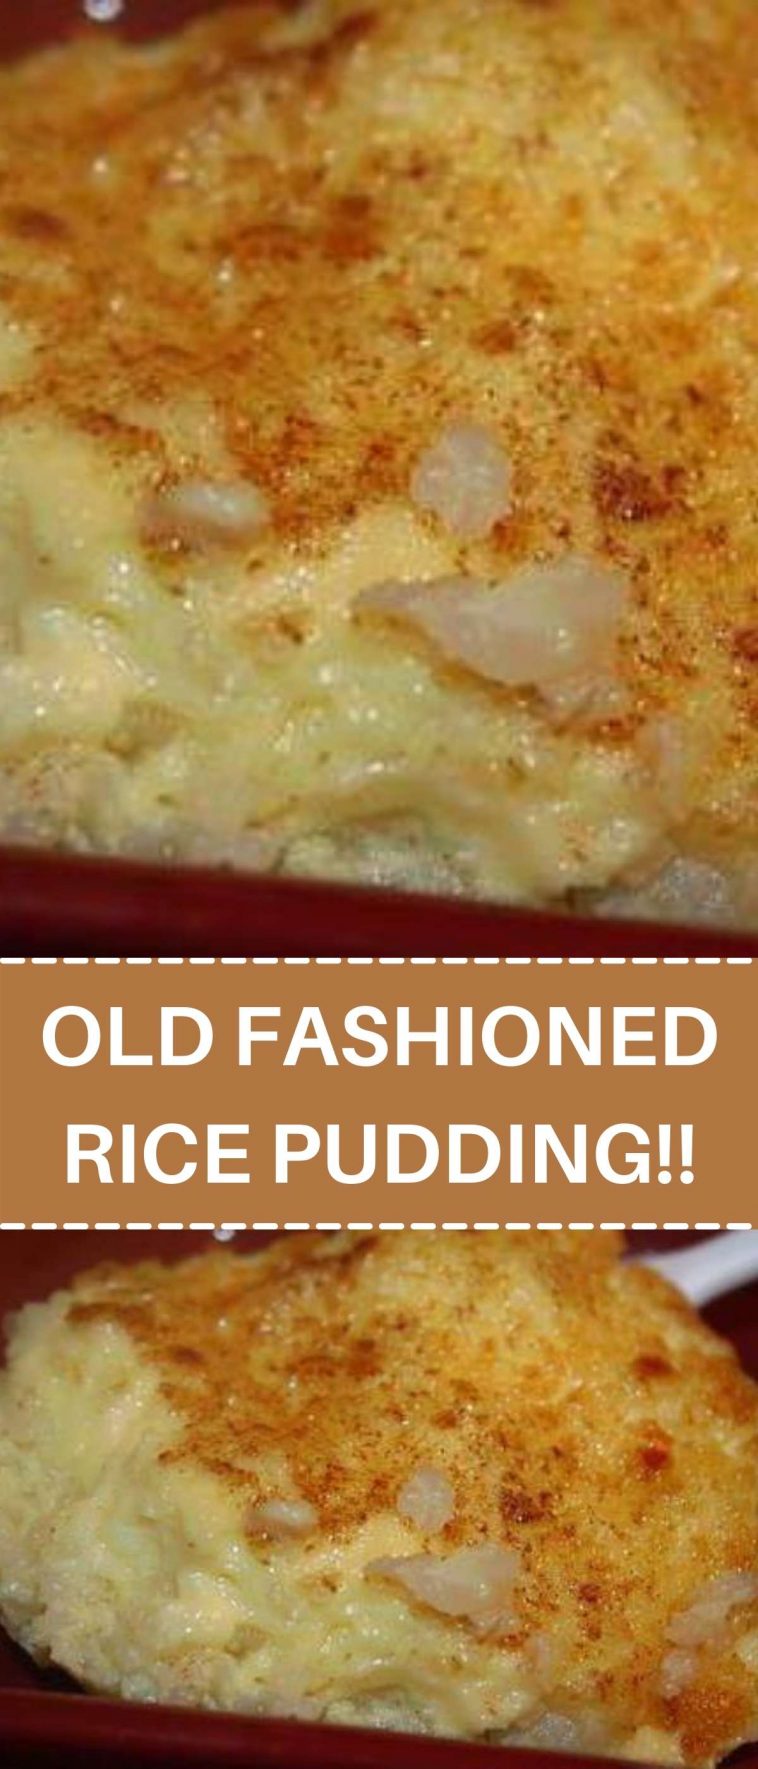 OLD FASHIONED RICE PUDDING!!